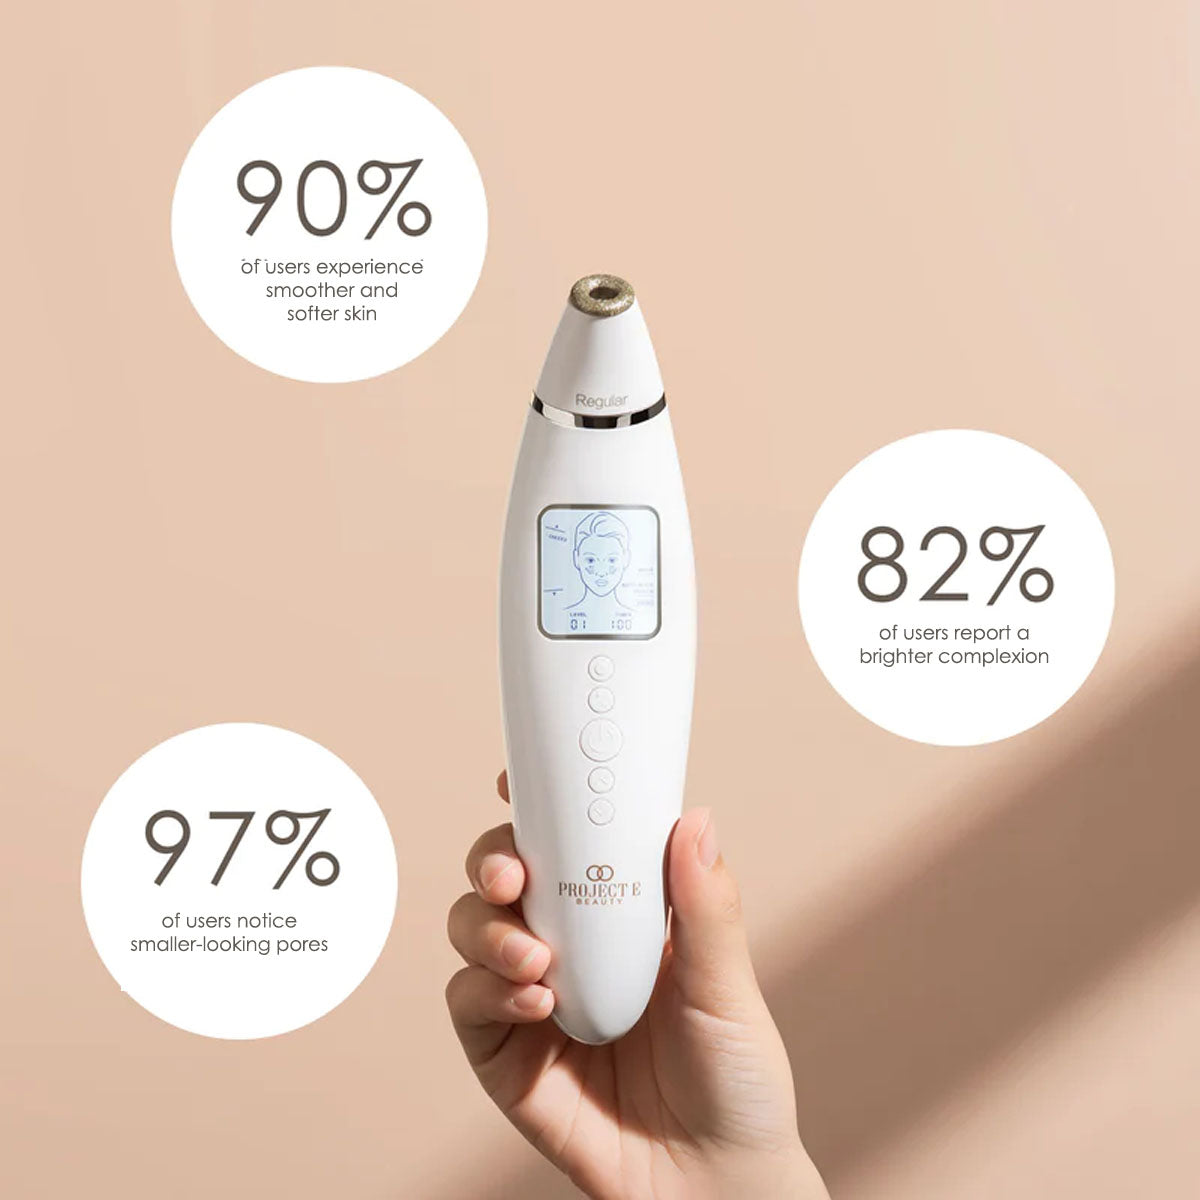 Reinvo | Facial Microdermabrasion Wand - Project E Beauty